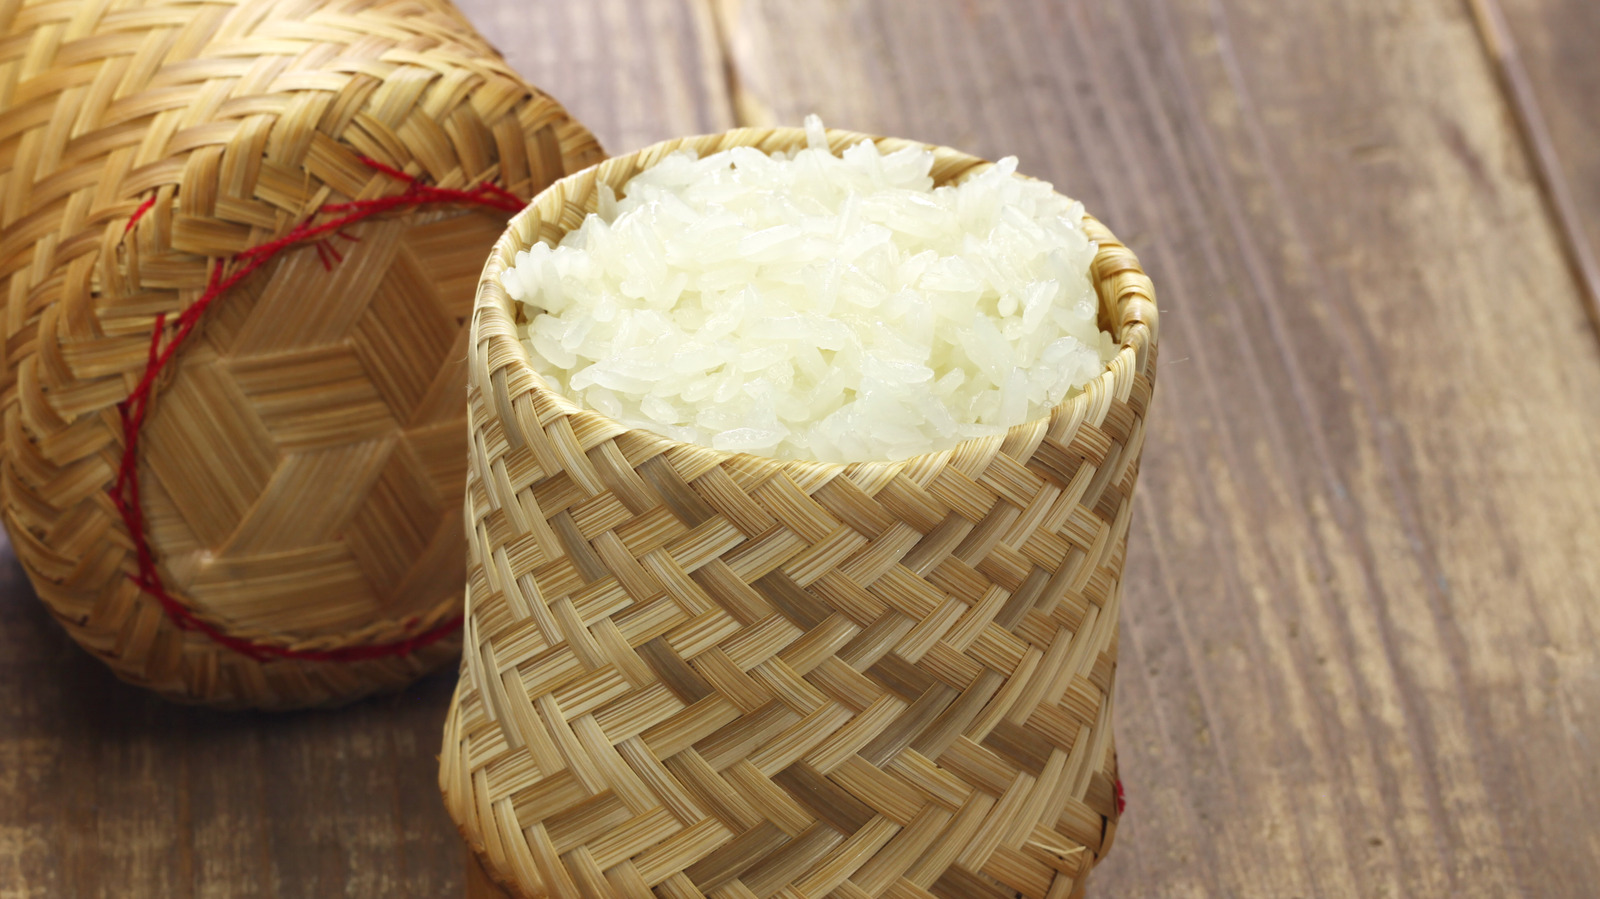 https://www.tastingtable.com/img/gallery/what-makes-sticky-rice-unique/l-intro-1669646298.jpg